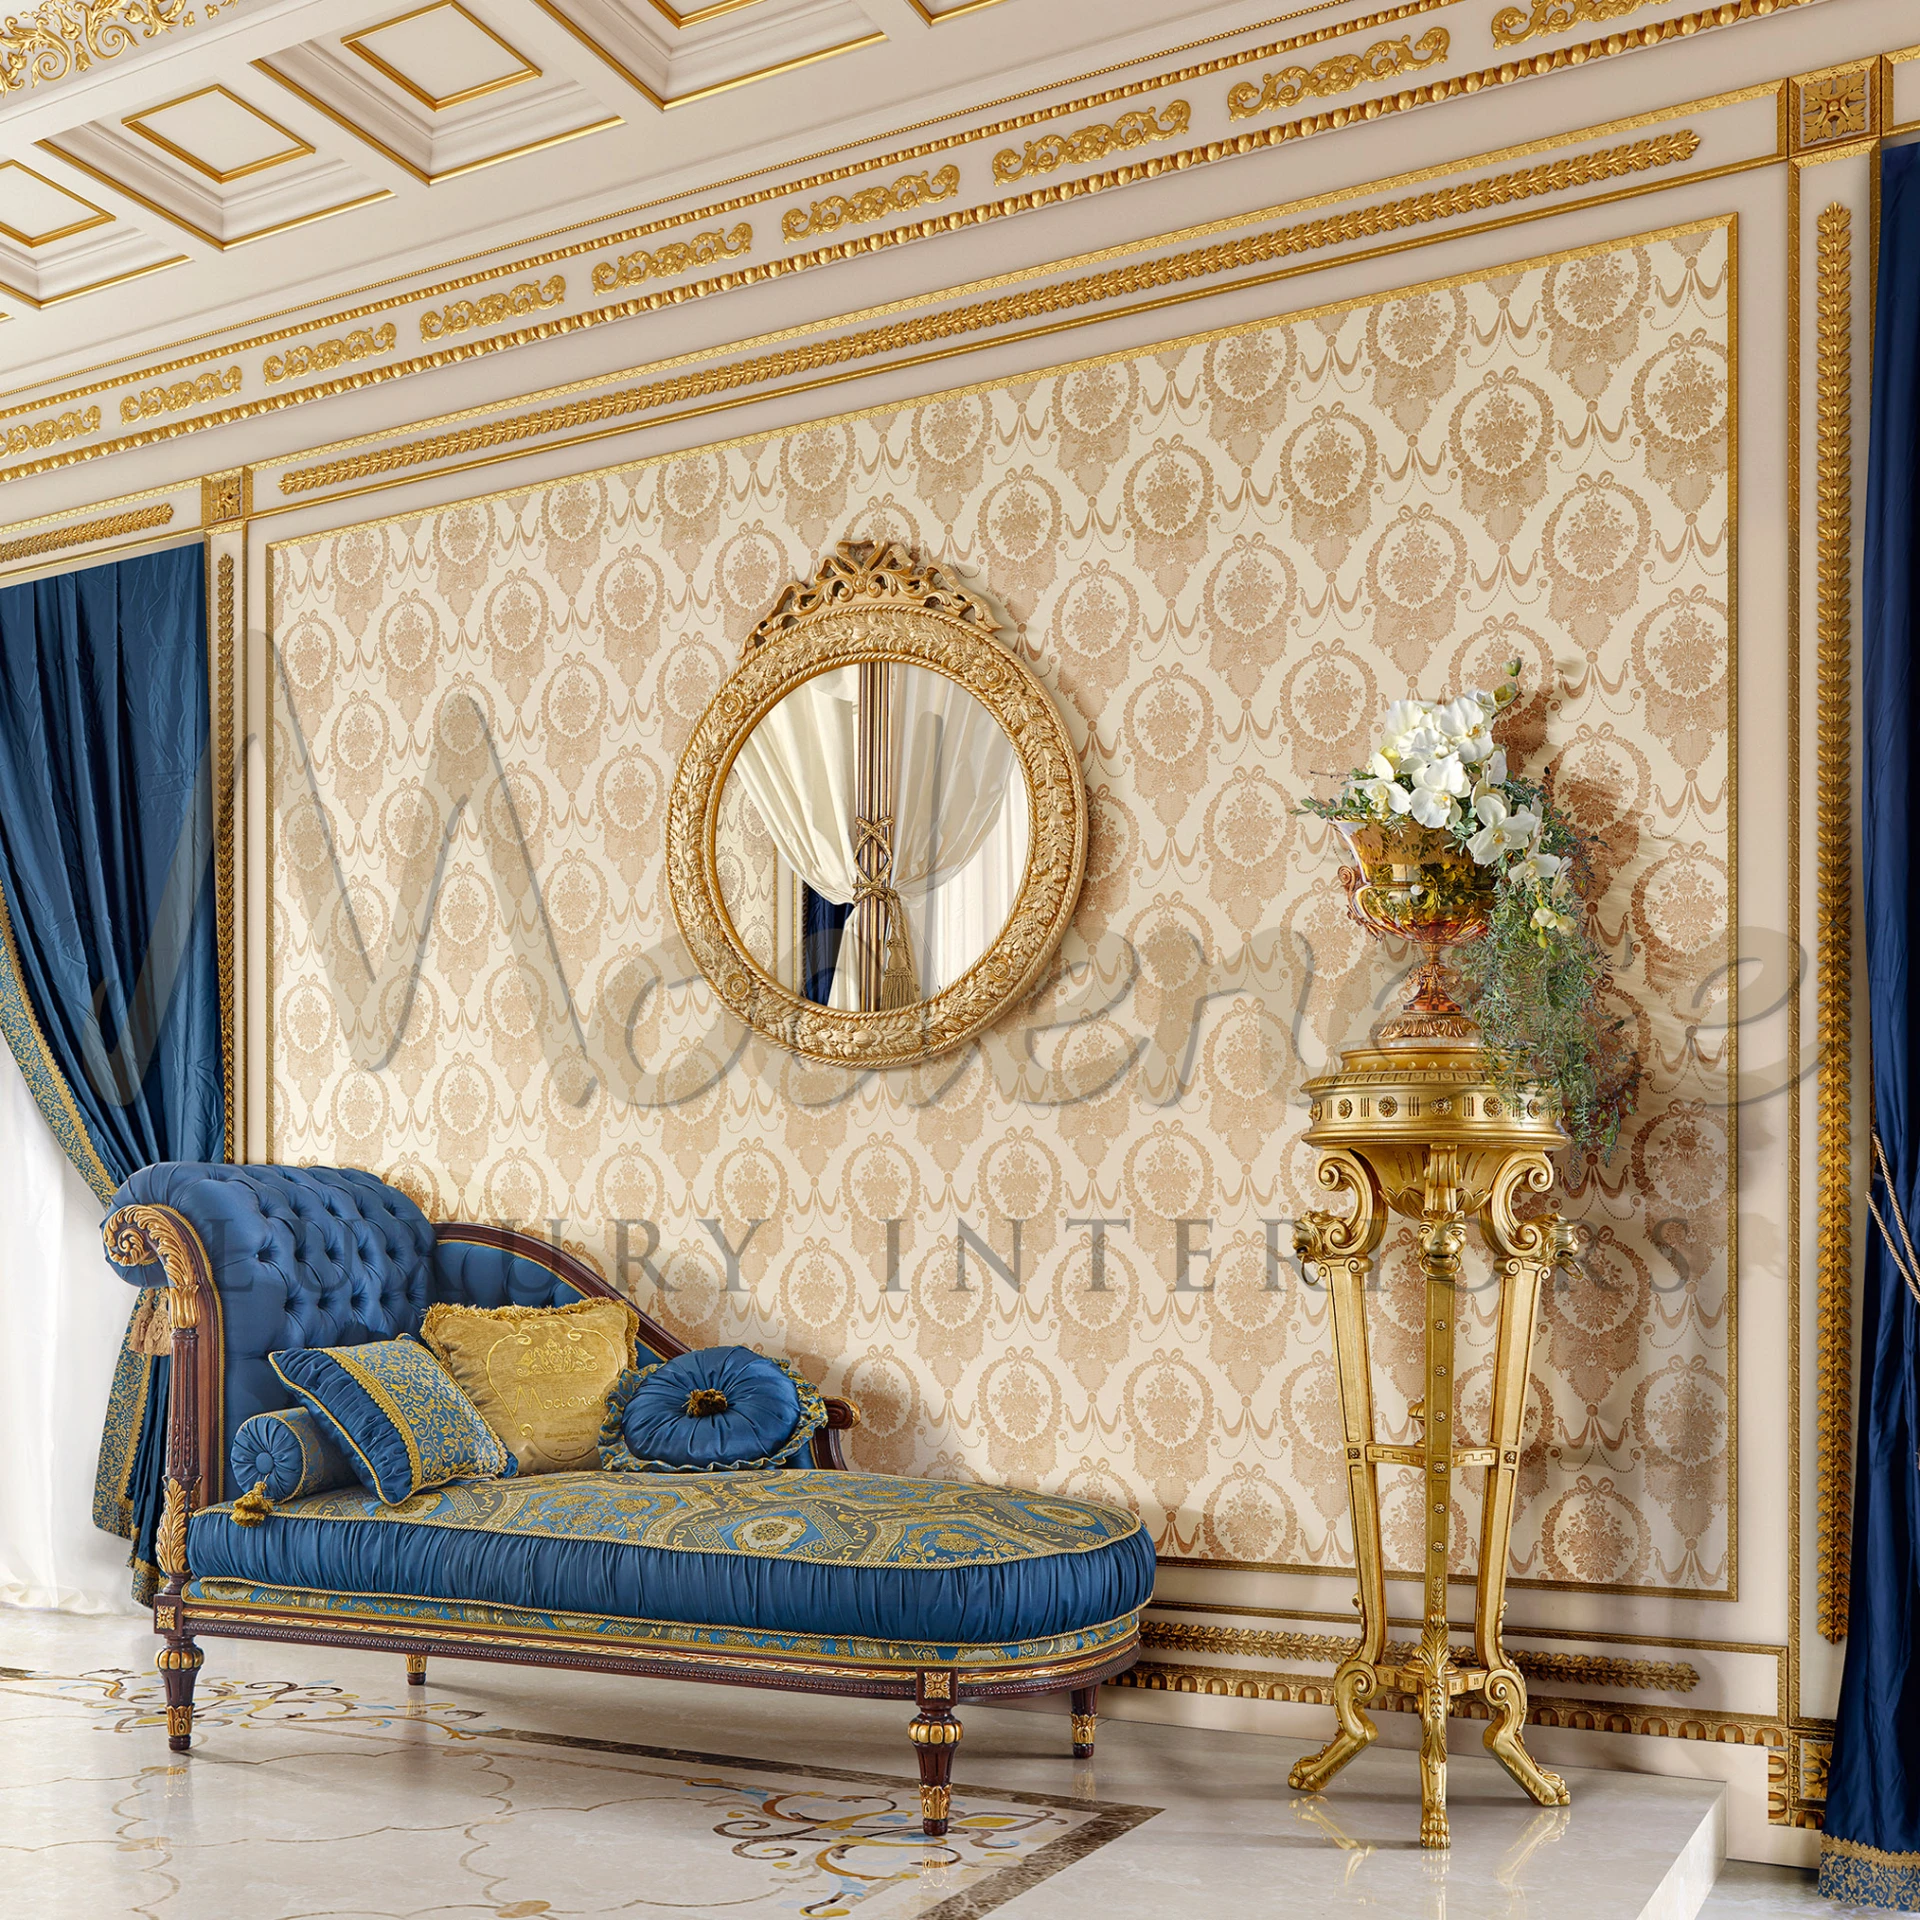 Classic chaise lounge with rolled armrest and blue and gold fabric design.                                                                                     